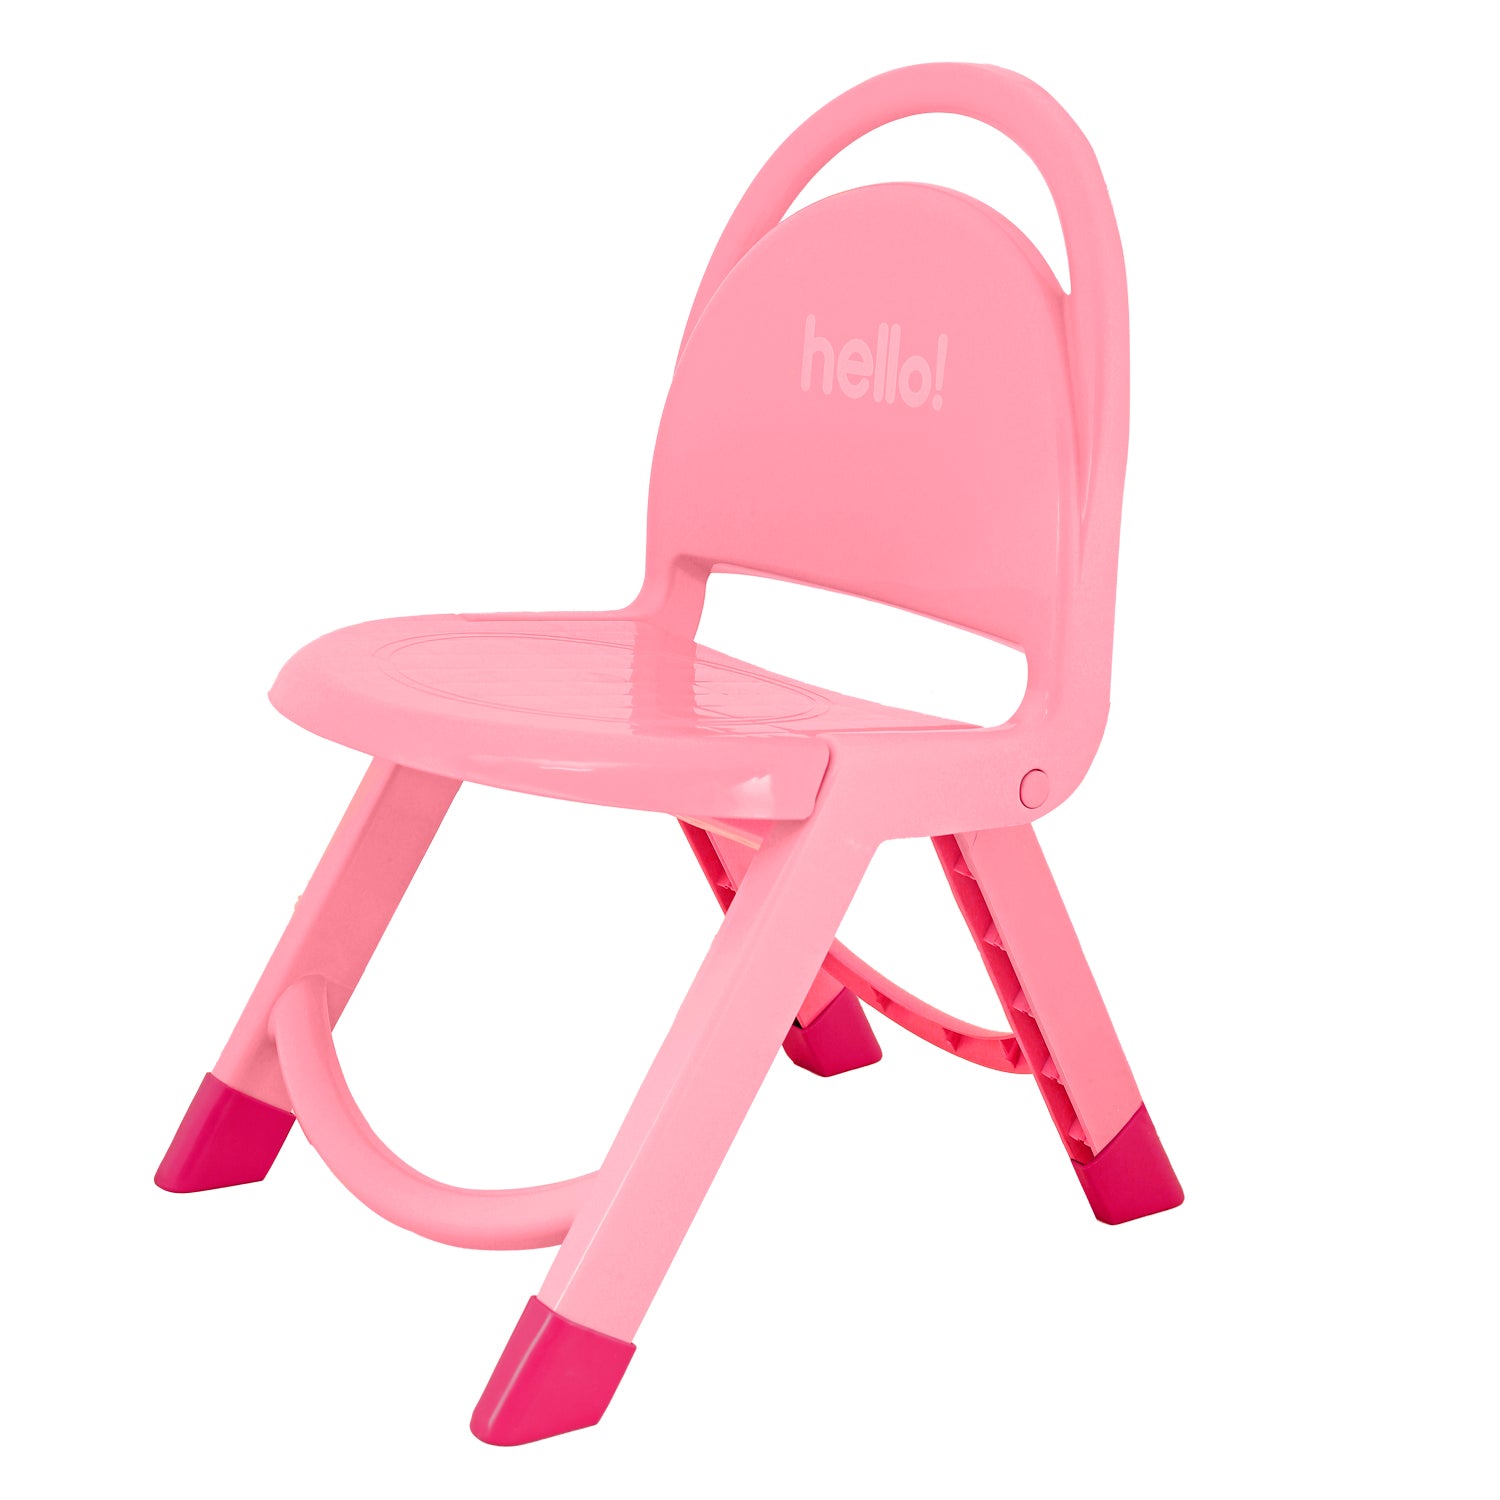 Foldable Multipurpose Pink Chair